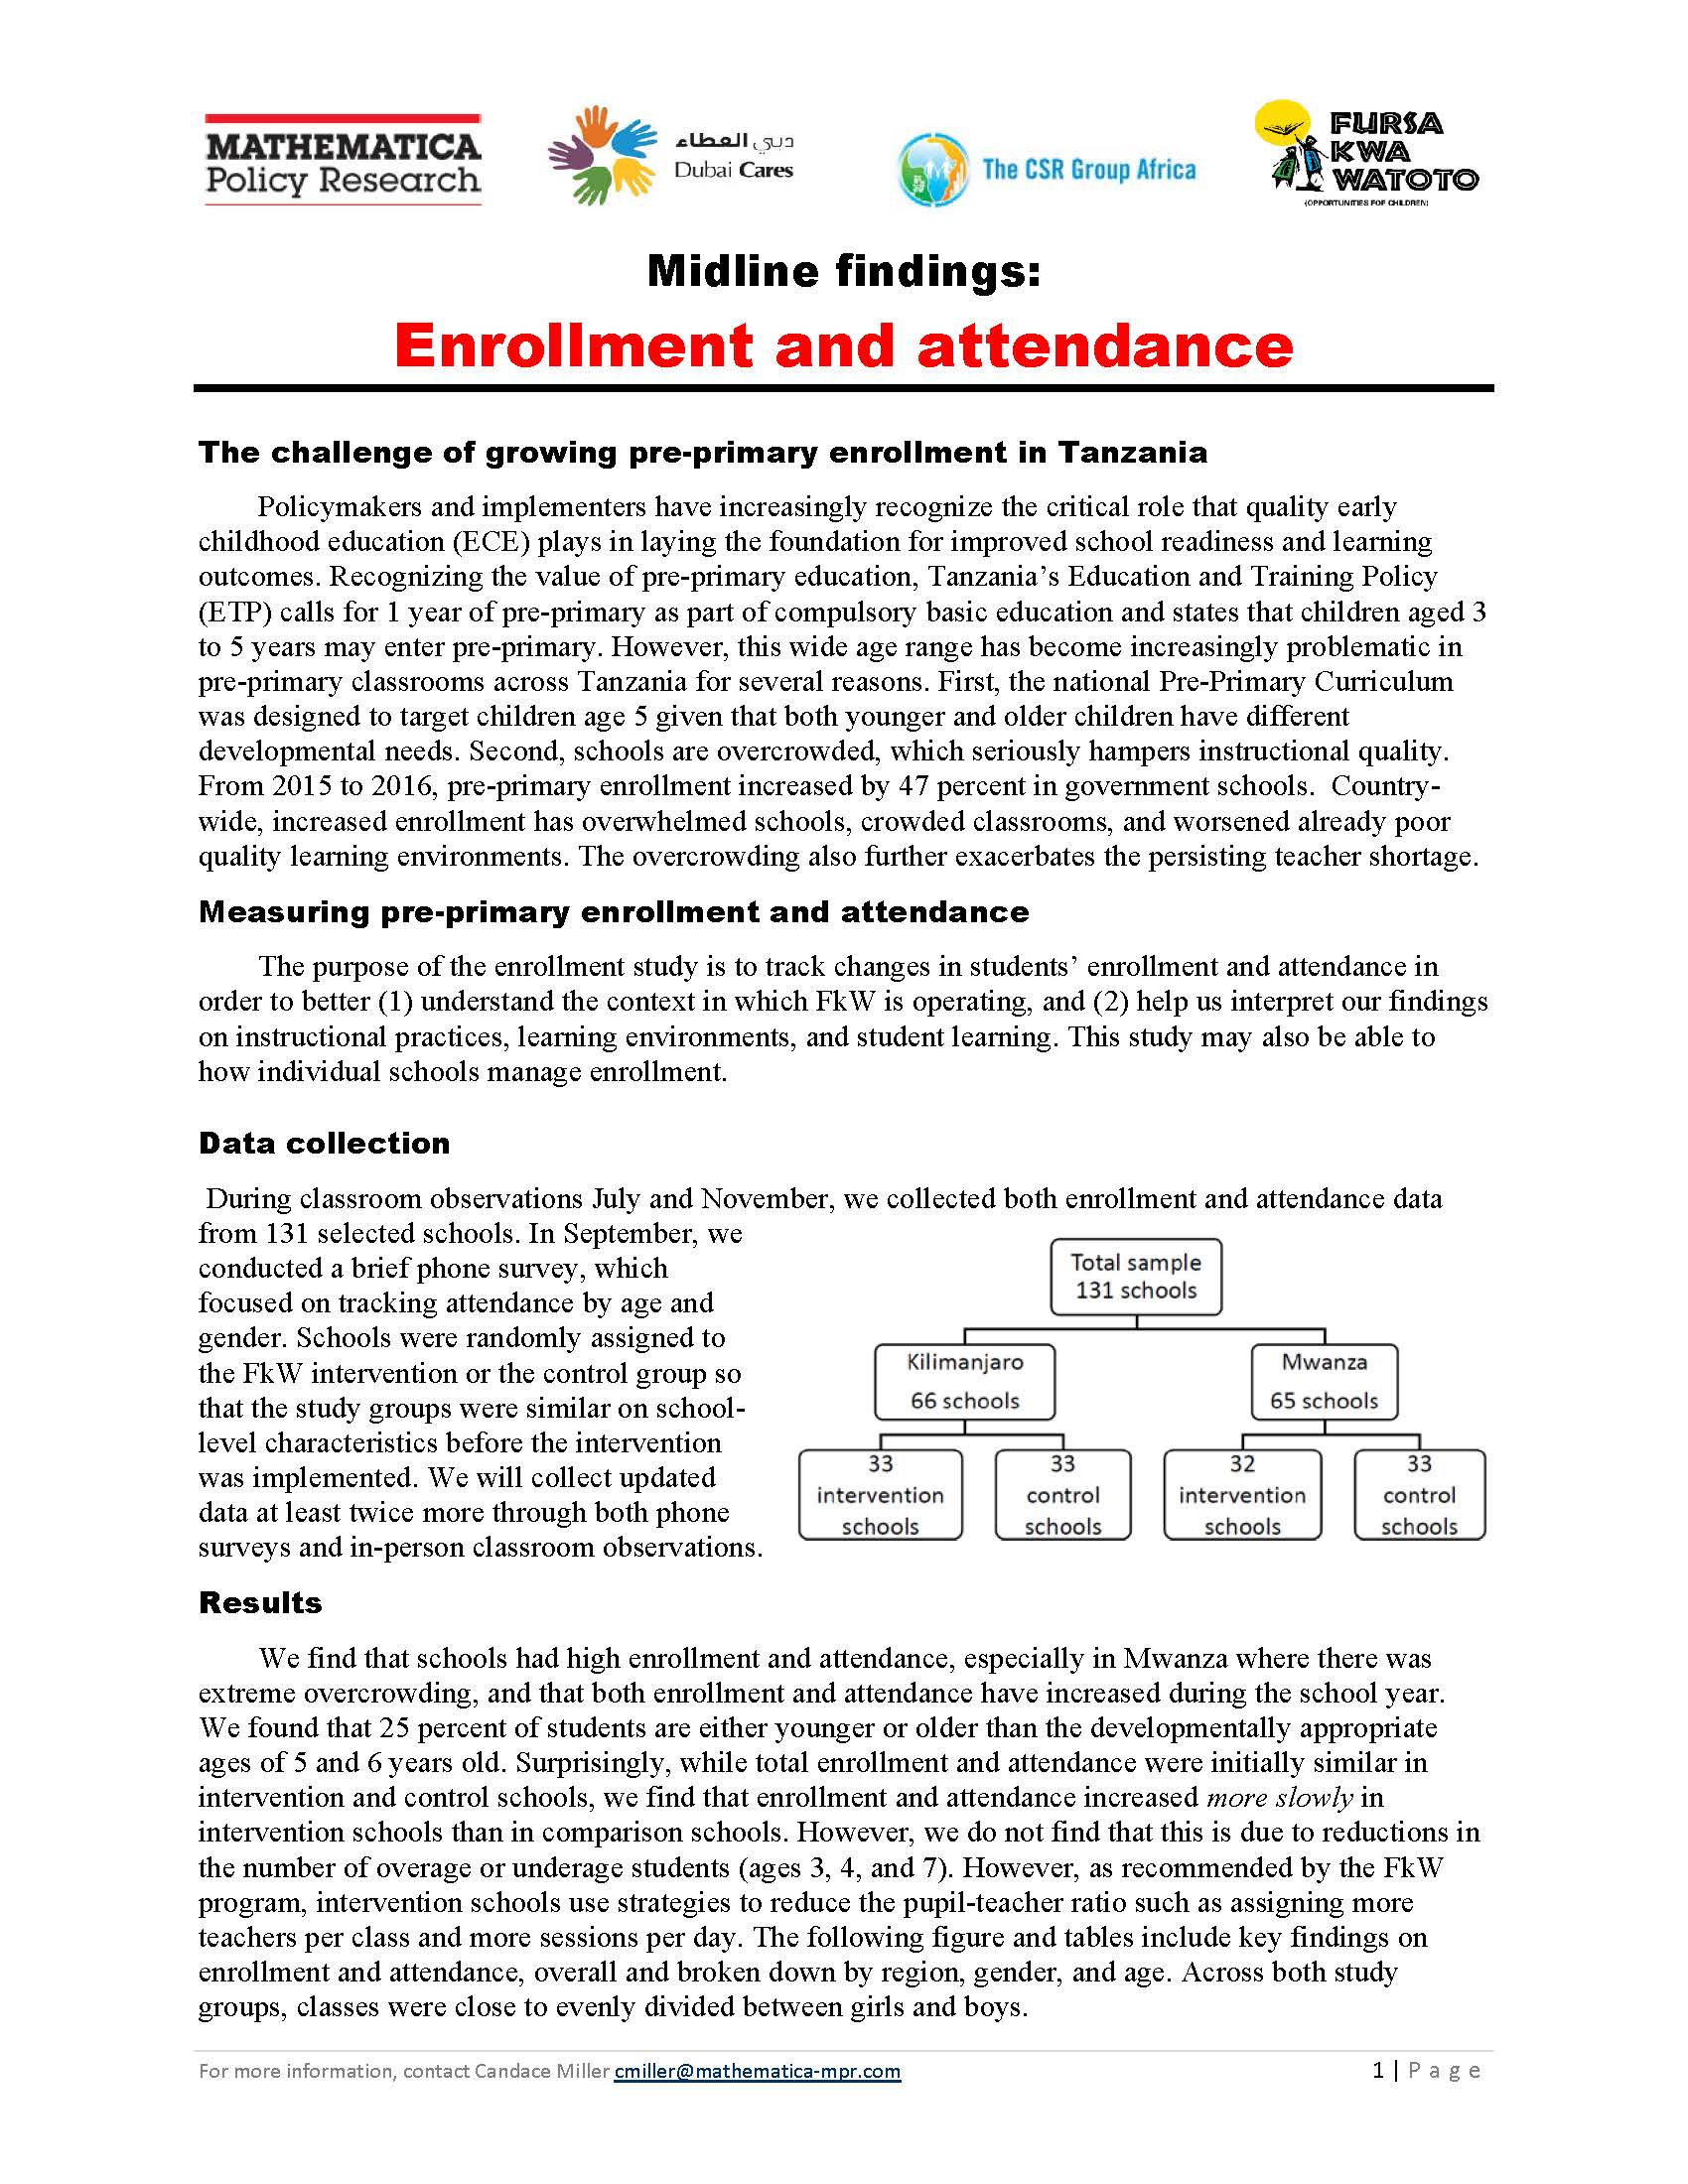 Enrollment Results Table